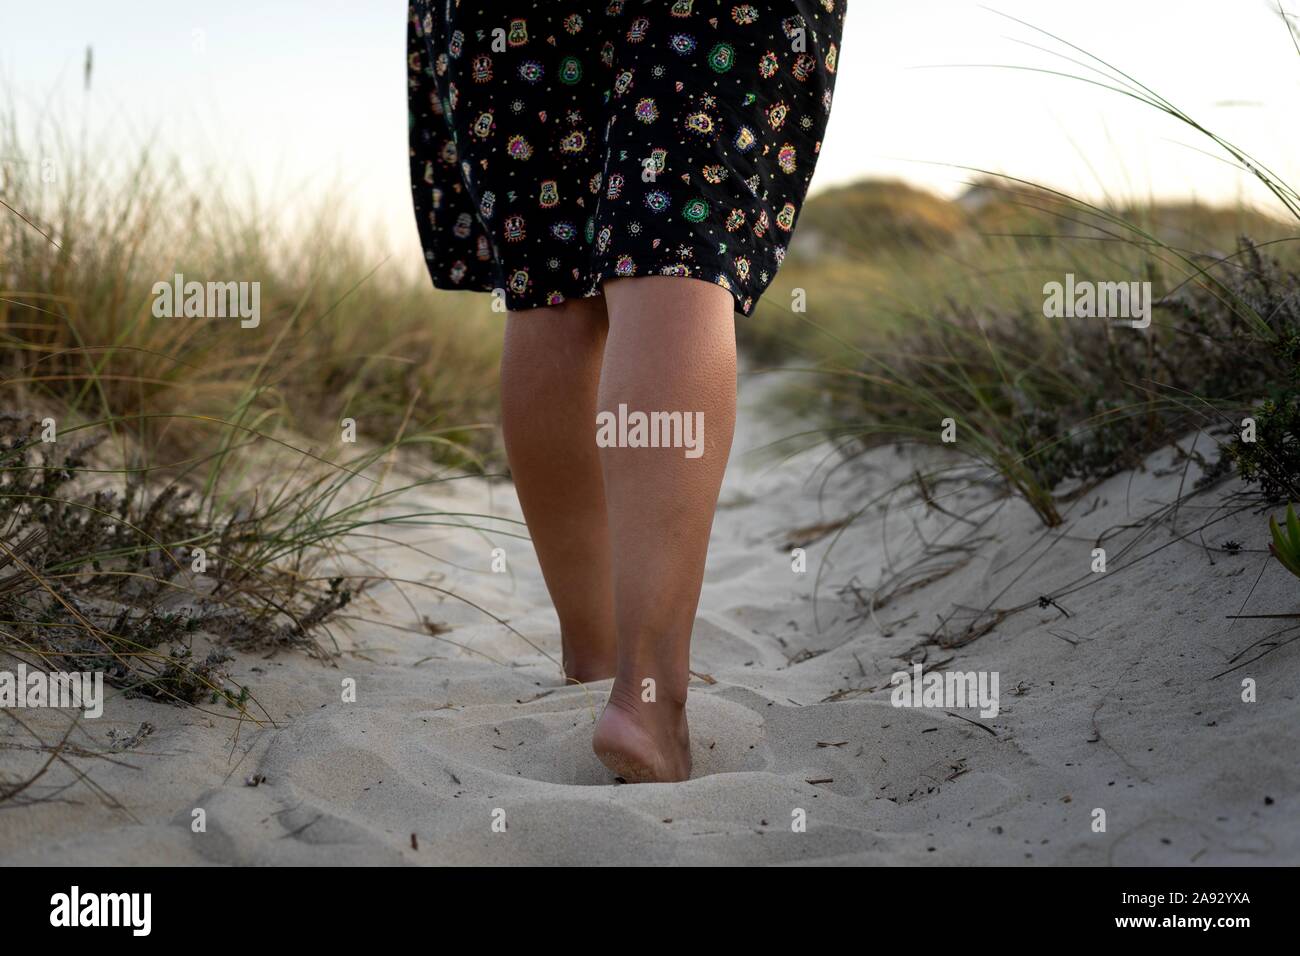 Woman in black dress with feet buried in sand seen from waist down Stock Photo